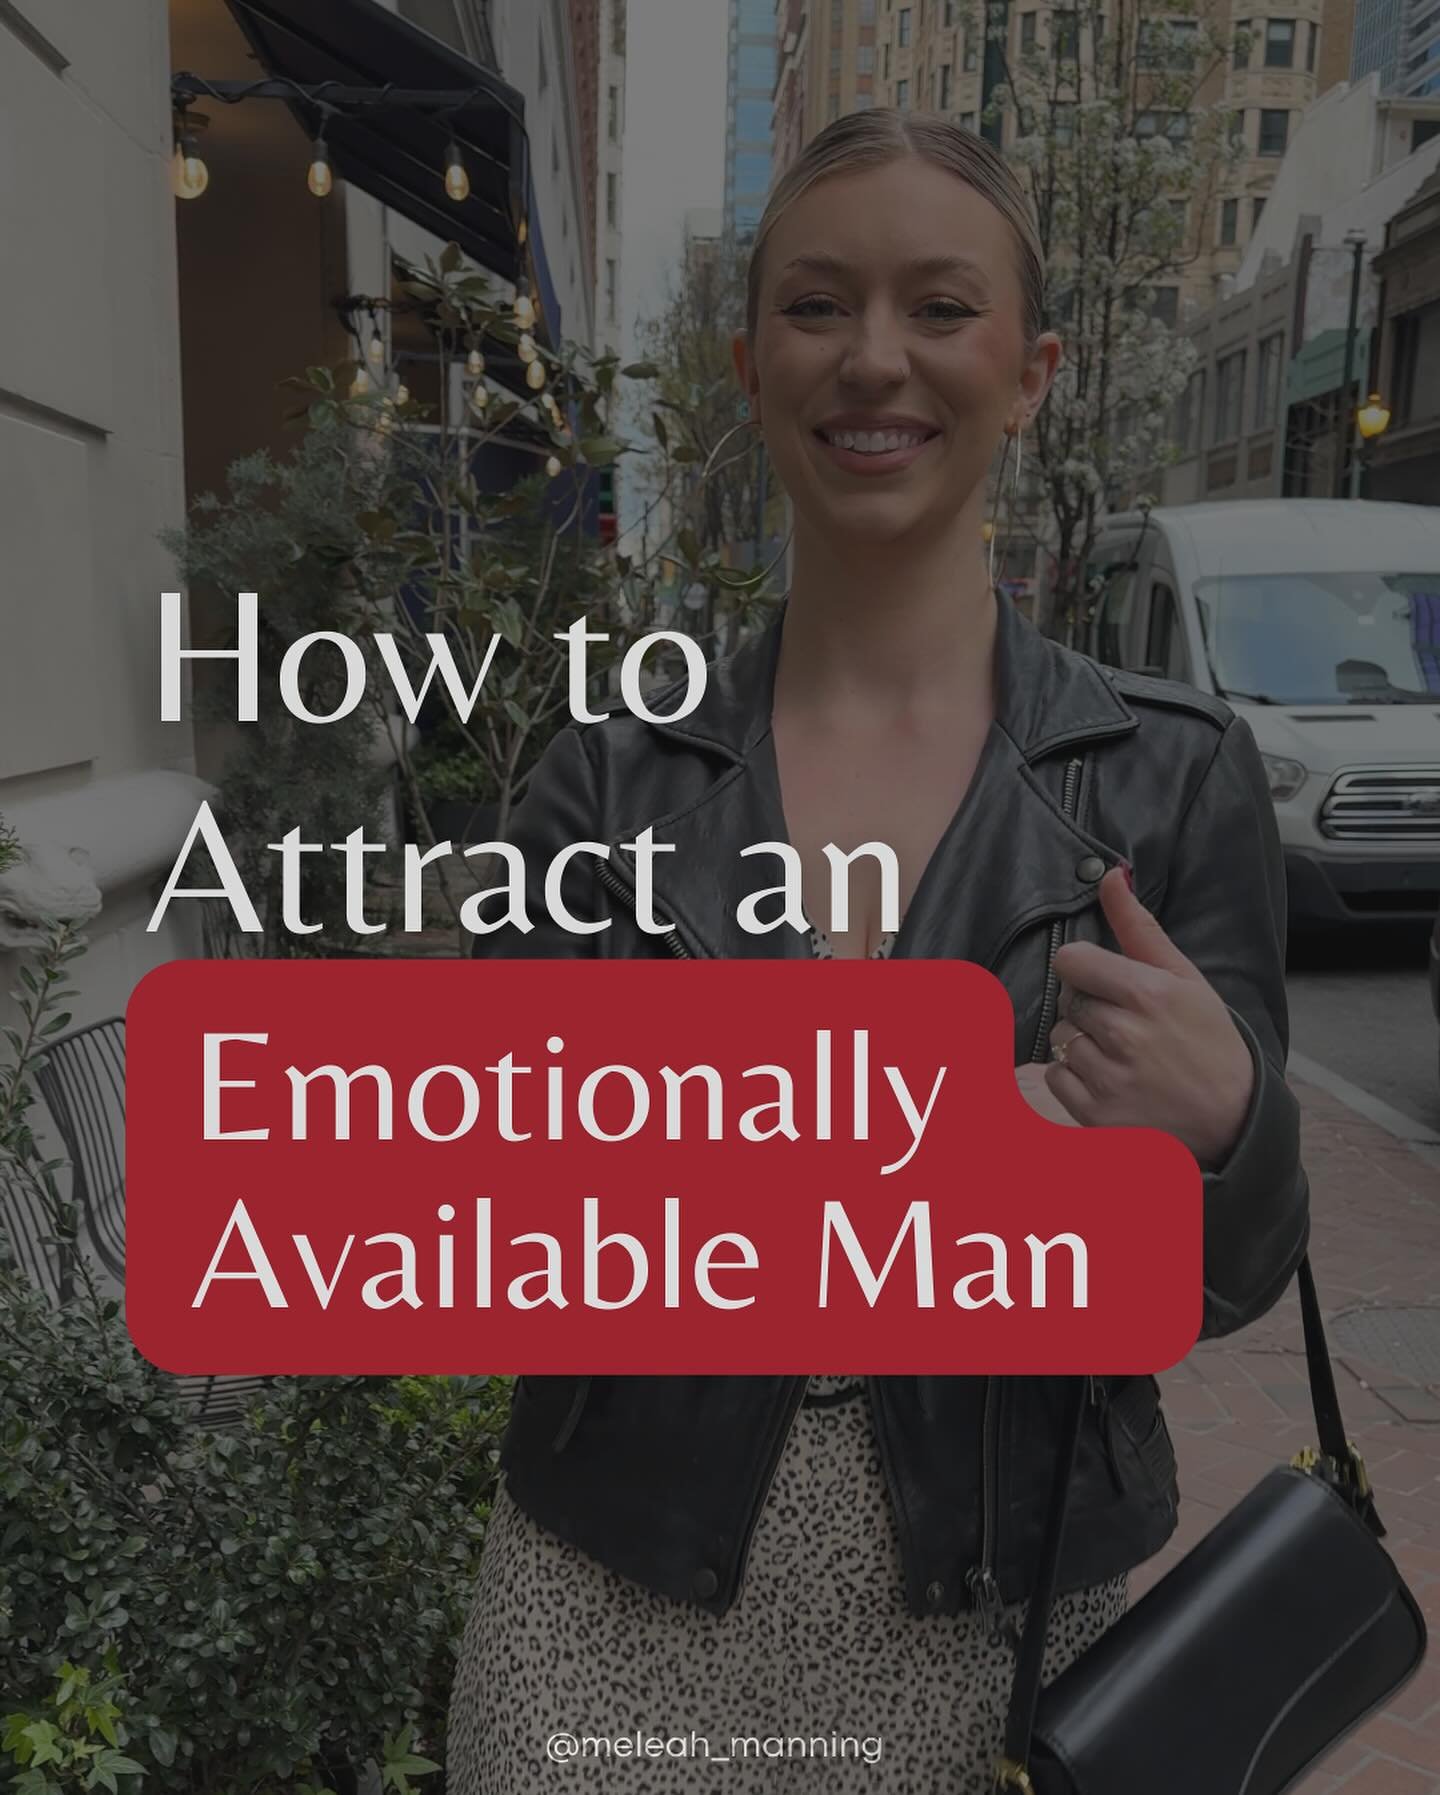 The exact roadmap of how to avoid emotionally unavailable men and jump to the good part of building a life with your dream partner 🗺️

Comment &ldquo;DATING&rdquo; for my free masterclass where I show you how!

including:

☝️&nbsp;&nbsp;The #1 way y